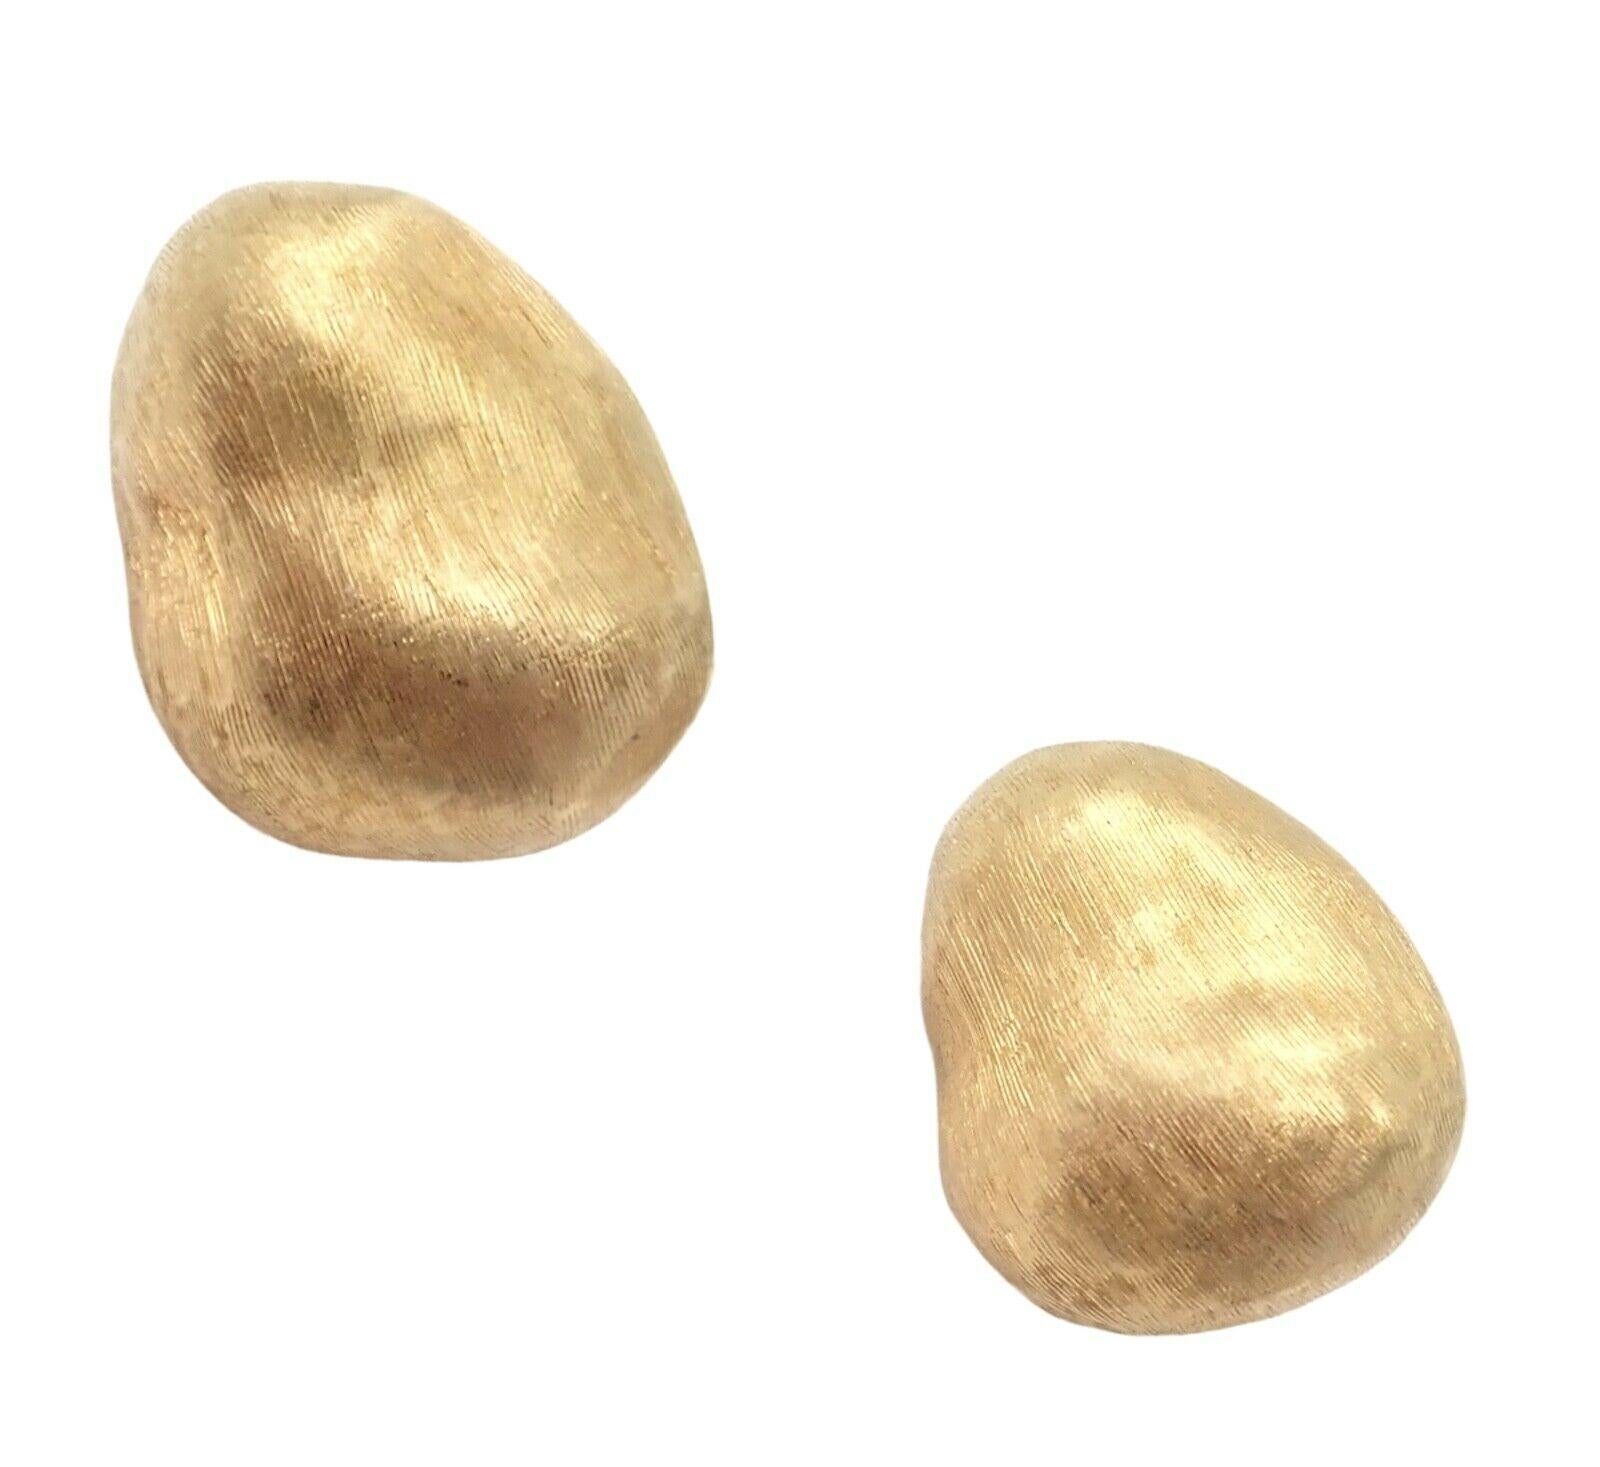 18k Yellow Gold Large Nugget Earrings by Paula Crevoshay.
Details:
Weight: 16.2 grams
Measurements: 19.5mm x 24mm
Stamped Hallmarks: CREVOSHAY 18K
*Free Shipping within the United States*
YOUR PRICE: $4,000
2718mtdd